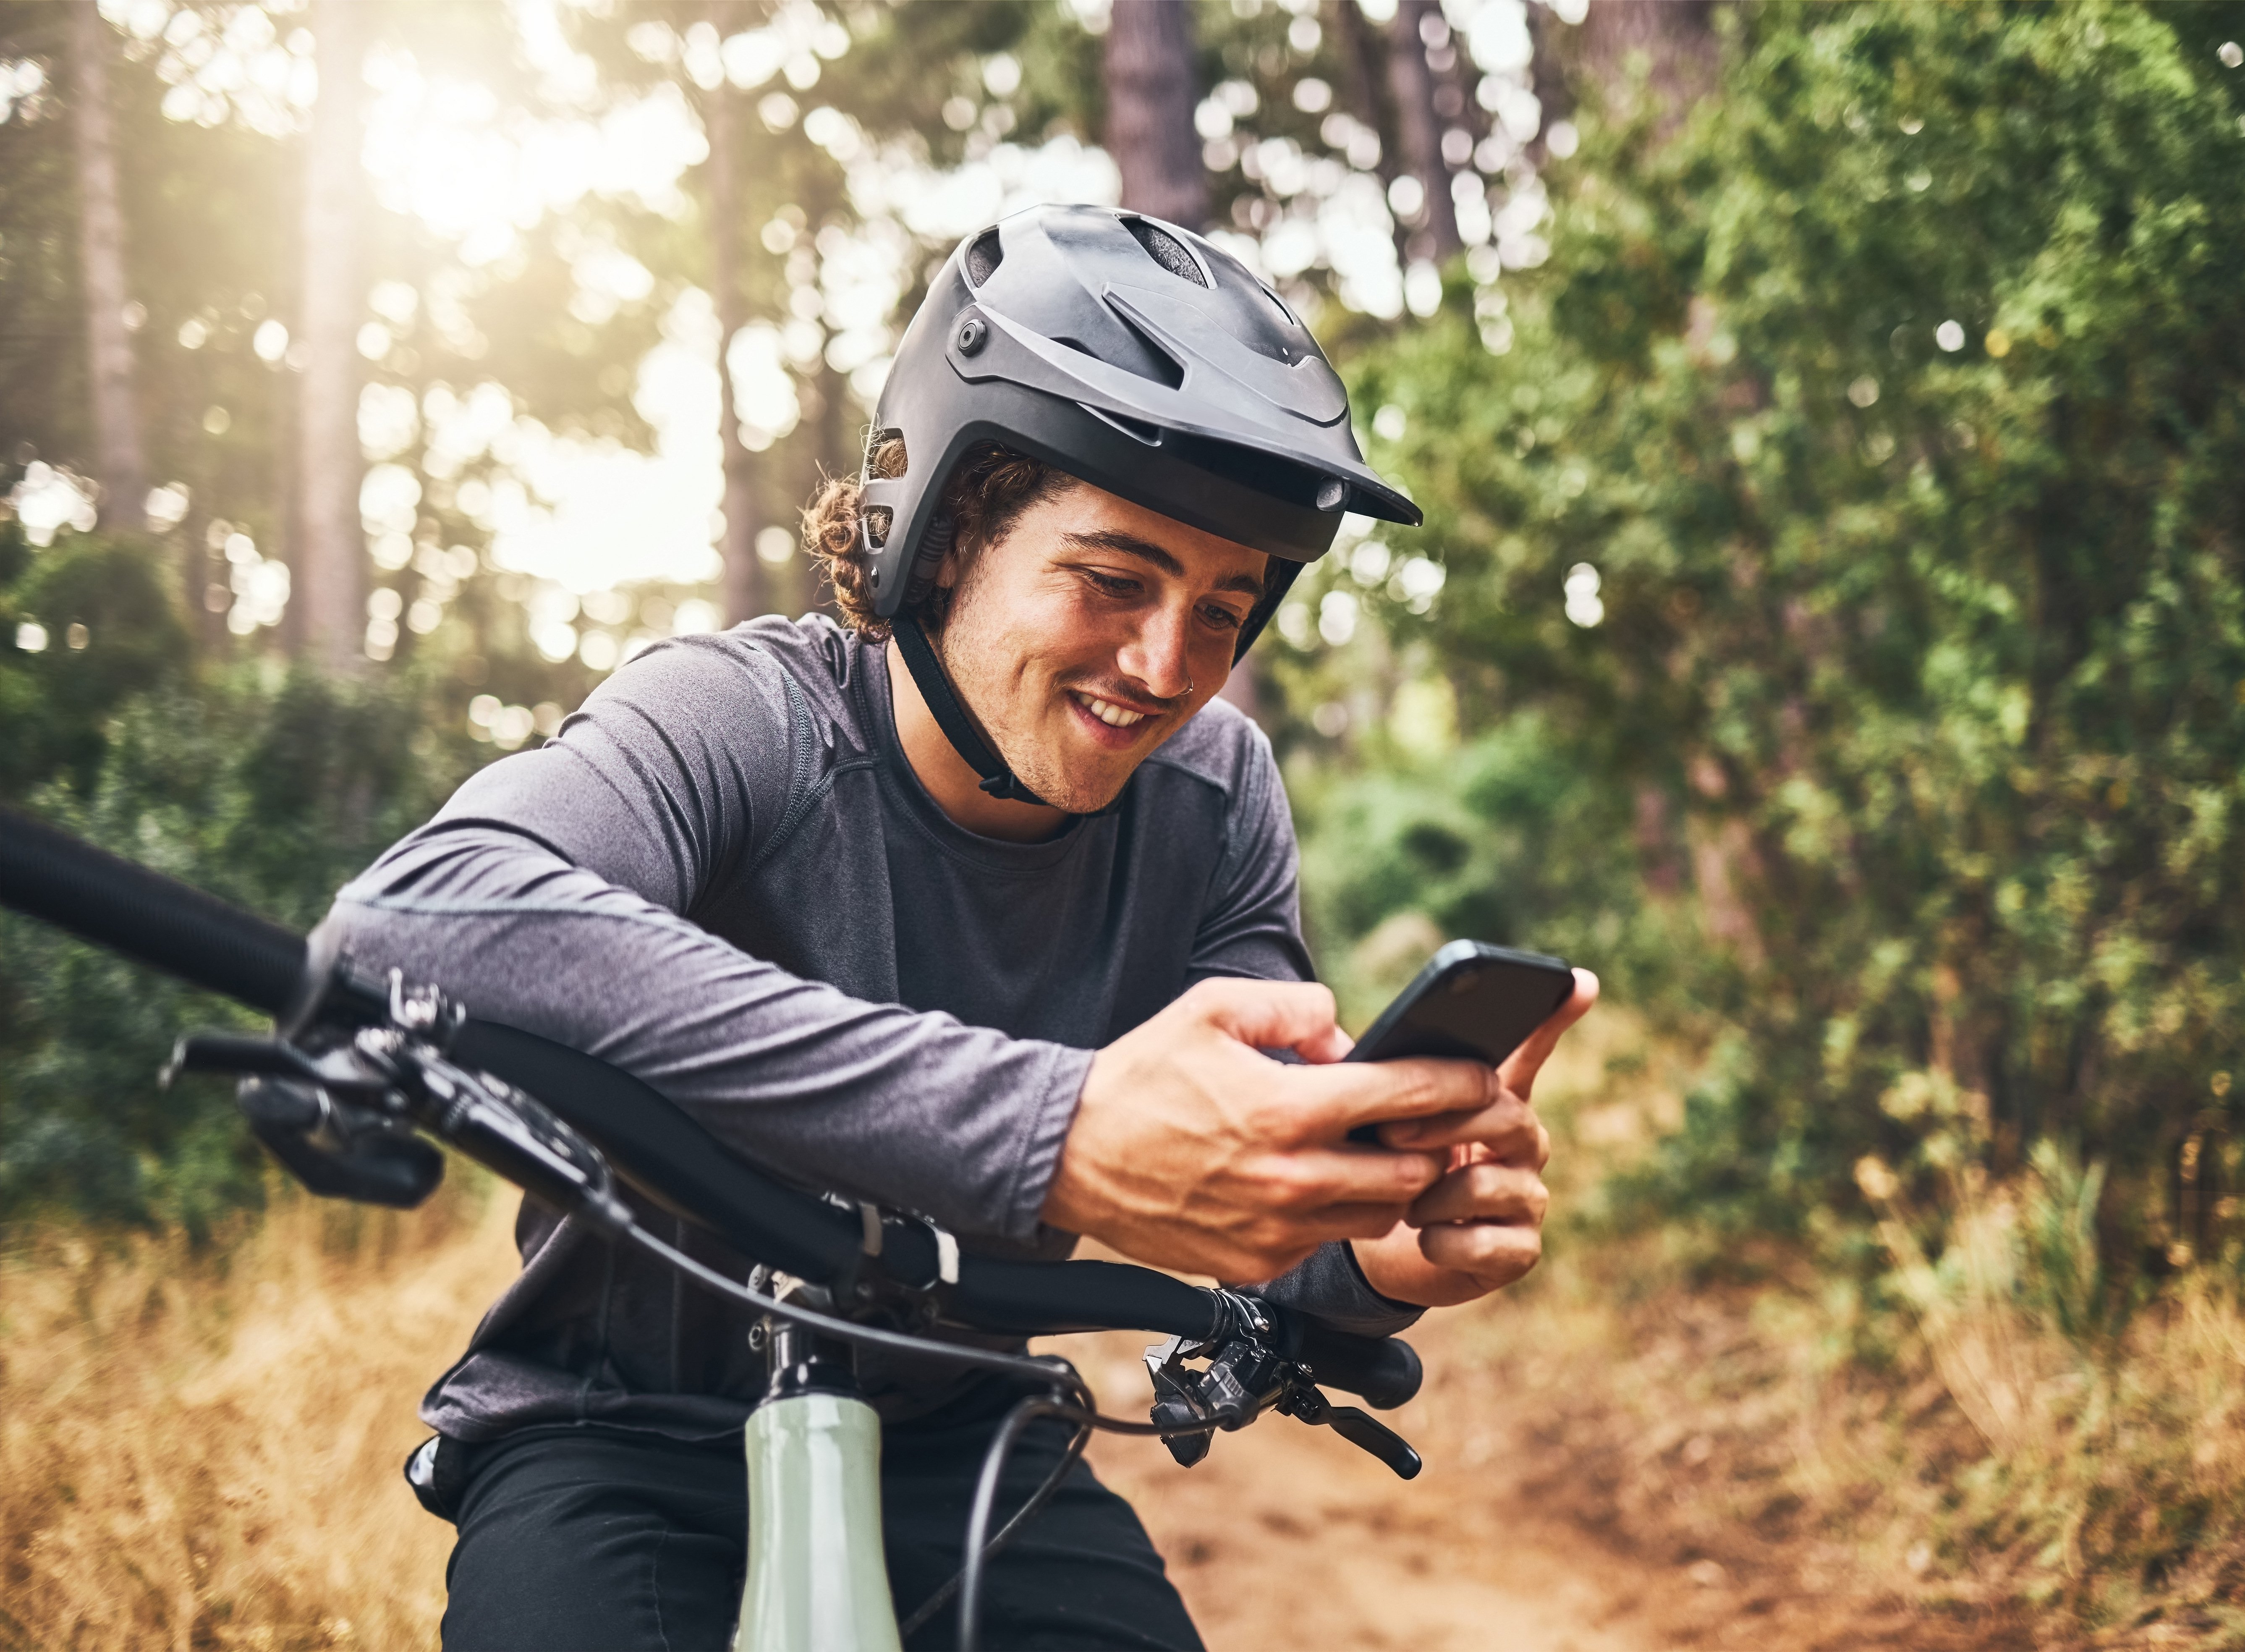 cycling-man-in-forest-phone-gps-and-map-direction-2022-12-14-23-23-10-utc